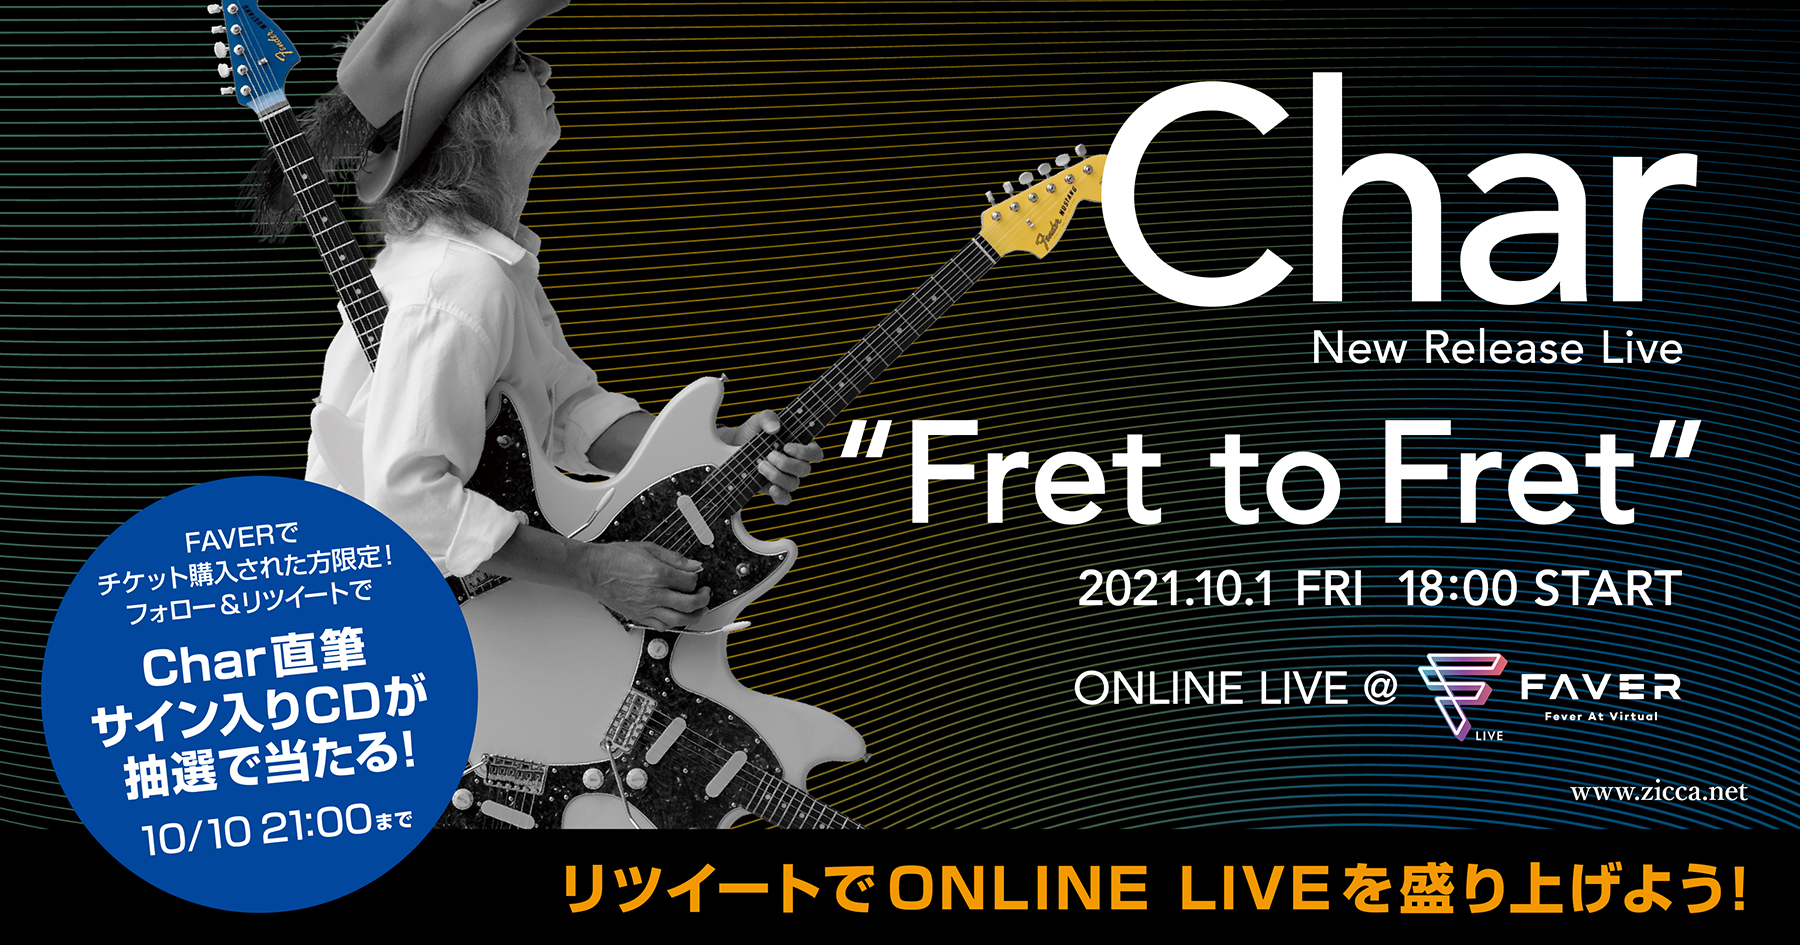 Char New Release Live “Fret to Fret” ONLINE LIVE フォロー＆リツィートキャンペーン